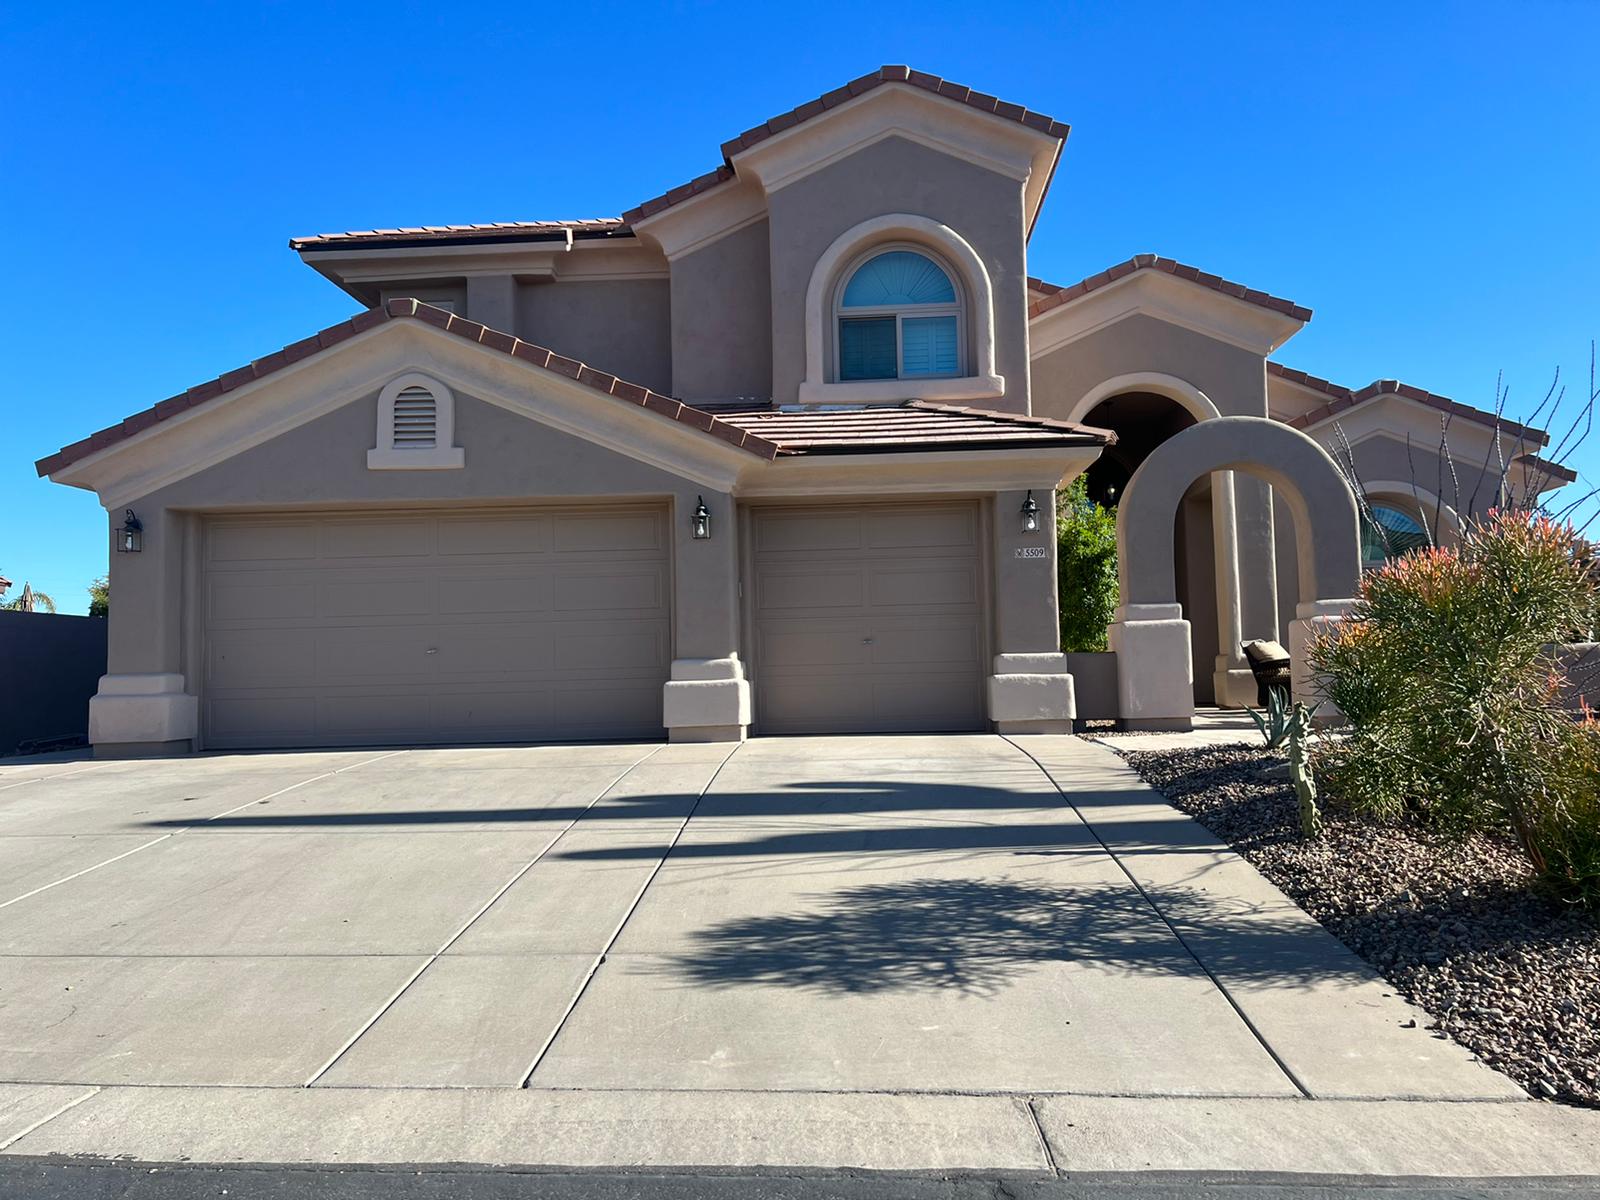 A serene Mesa neighborhood with a freshly installed Behmer tile roof, epitomizing the blend of aesthetics and functionality in roofing solutions.